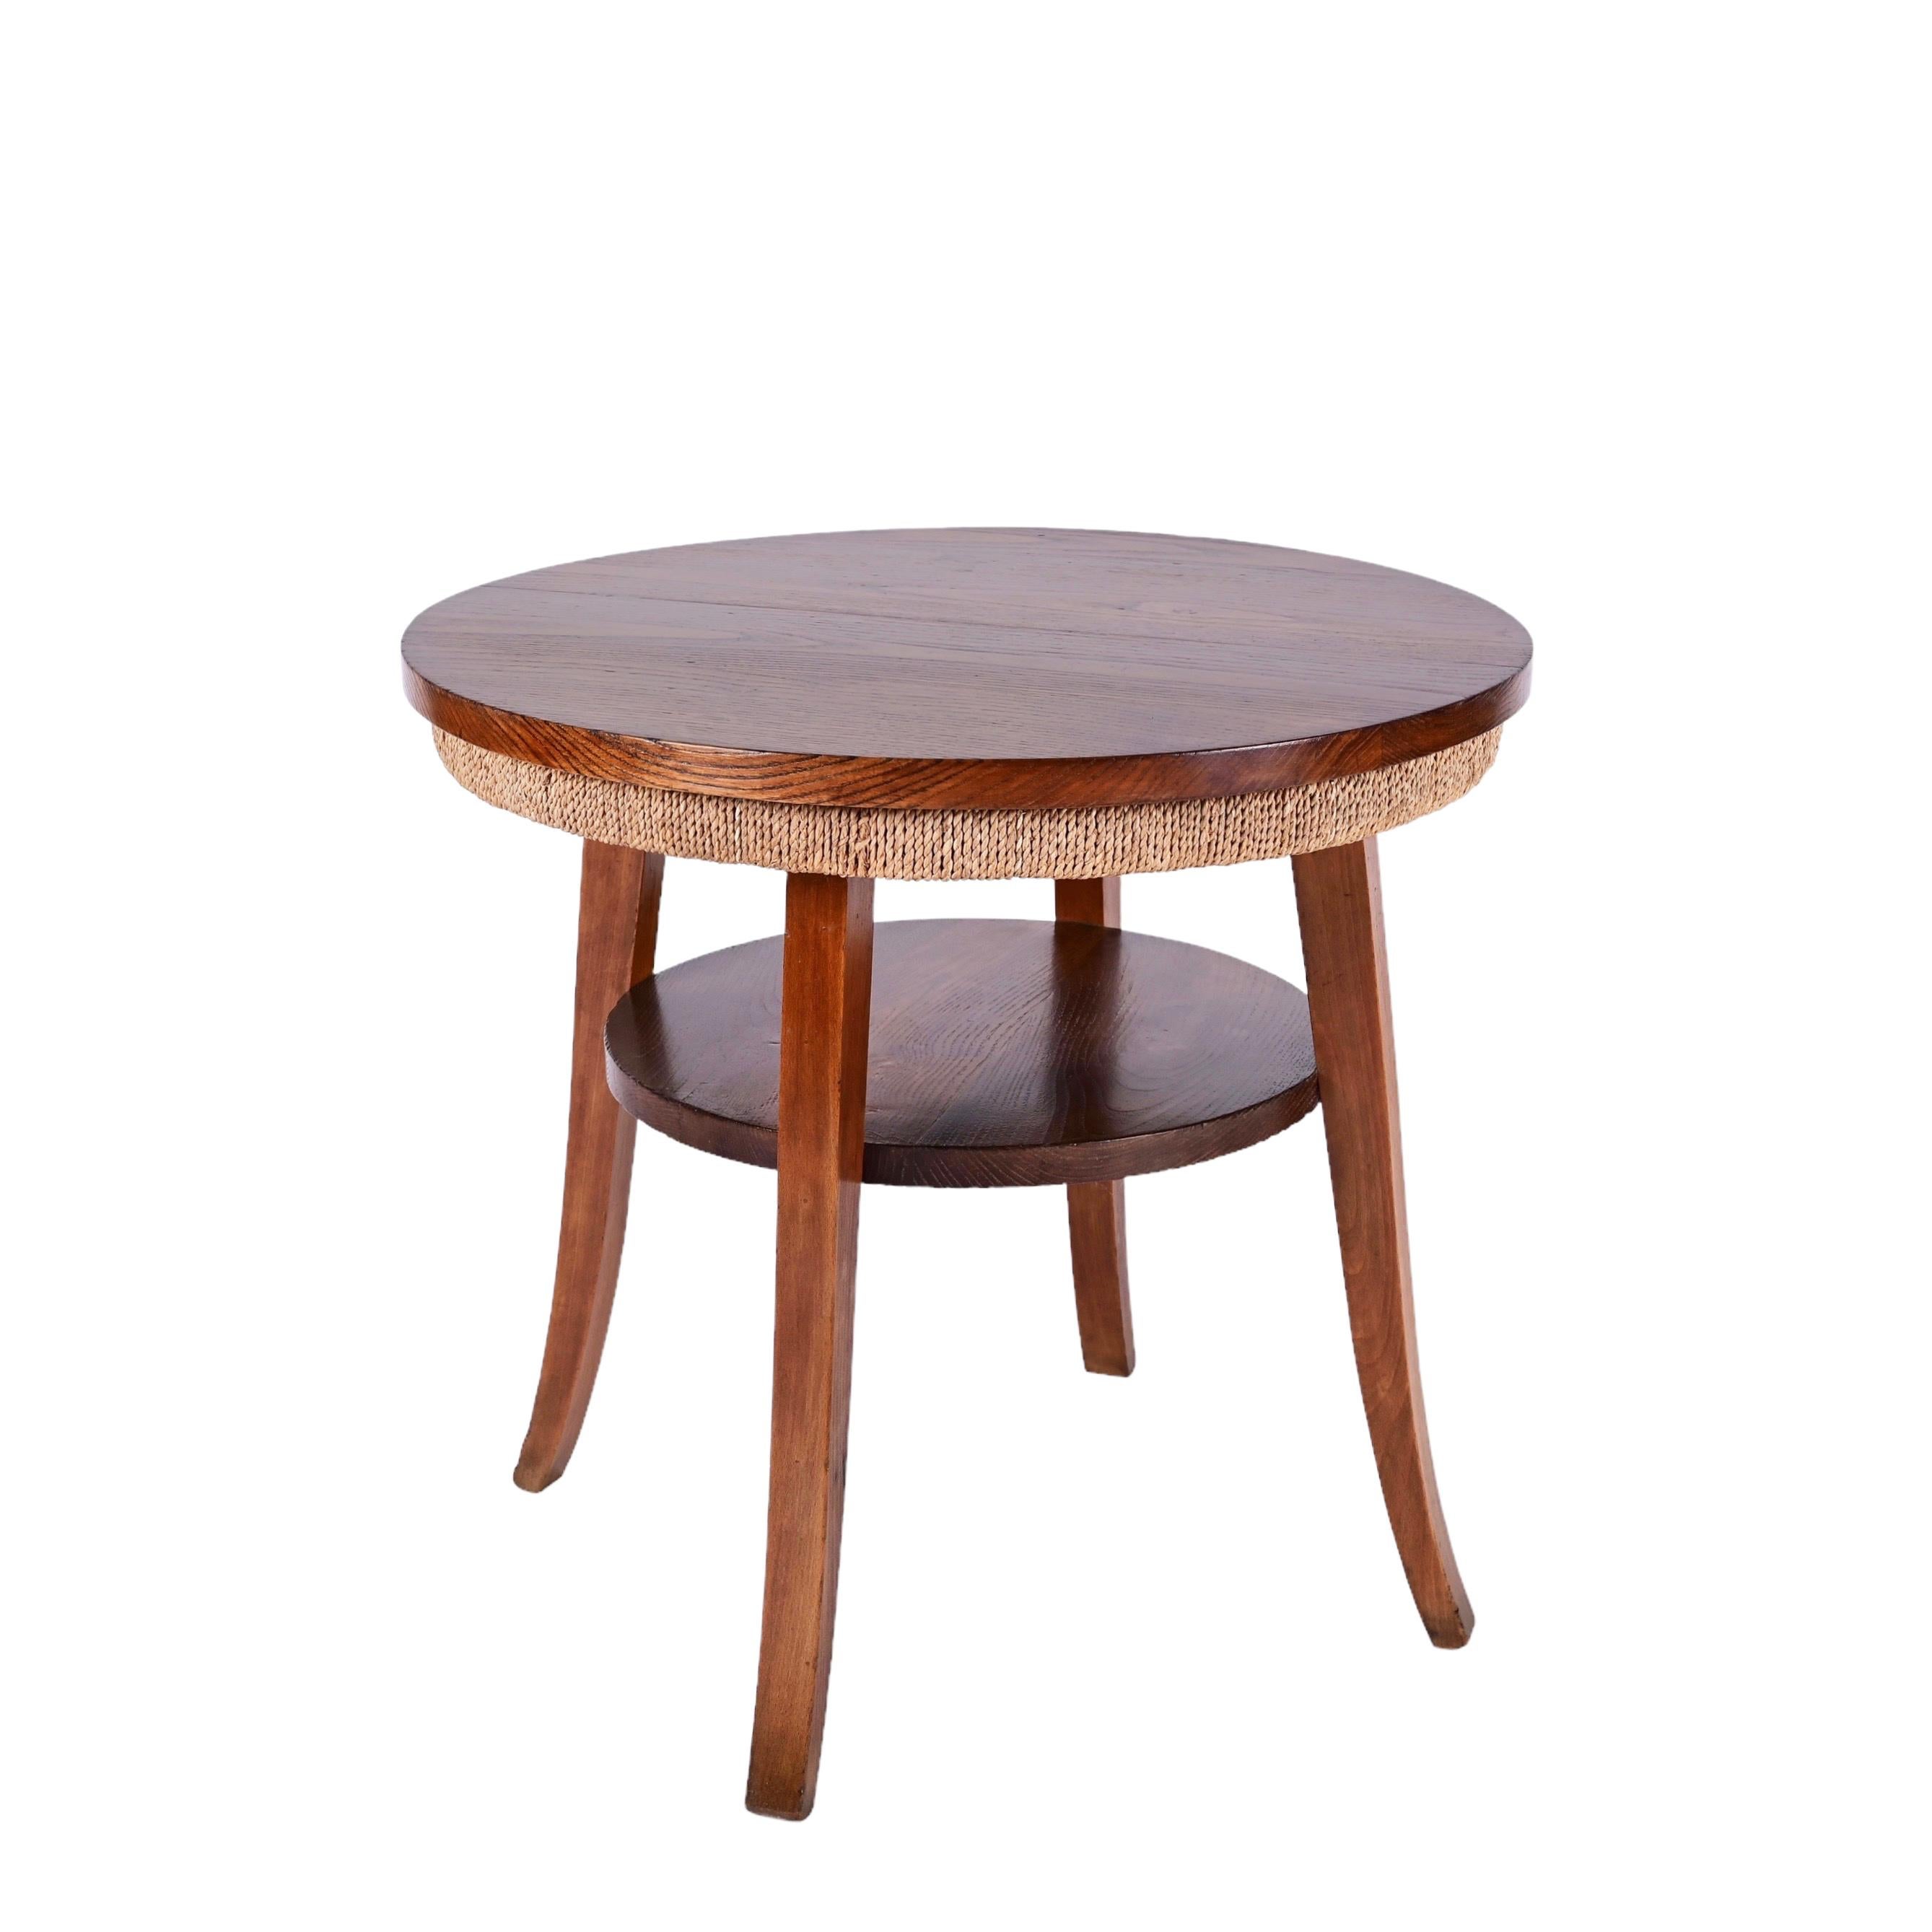 Midcentury two-tier round rope and chestnut wood coffee table. This incredible piece was produced in Italy during the 1950s, and it is attributed to Giuseppe Pagano Pogatschnig.

This item is a wonderful rope cocktail table with two shelves in